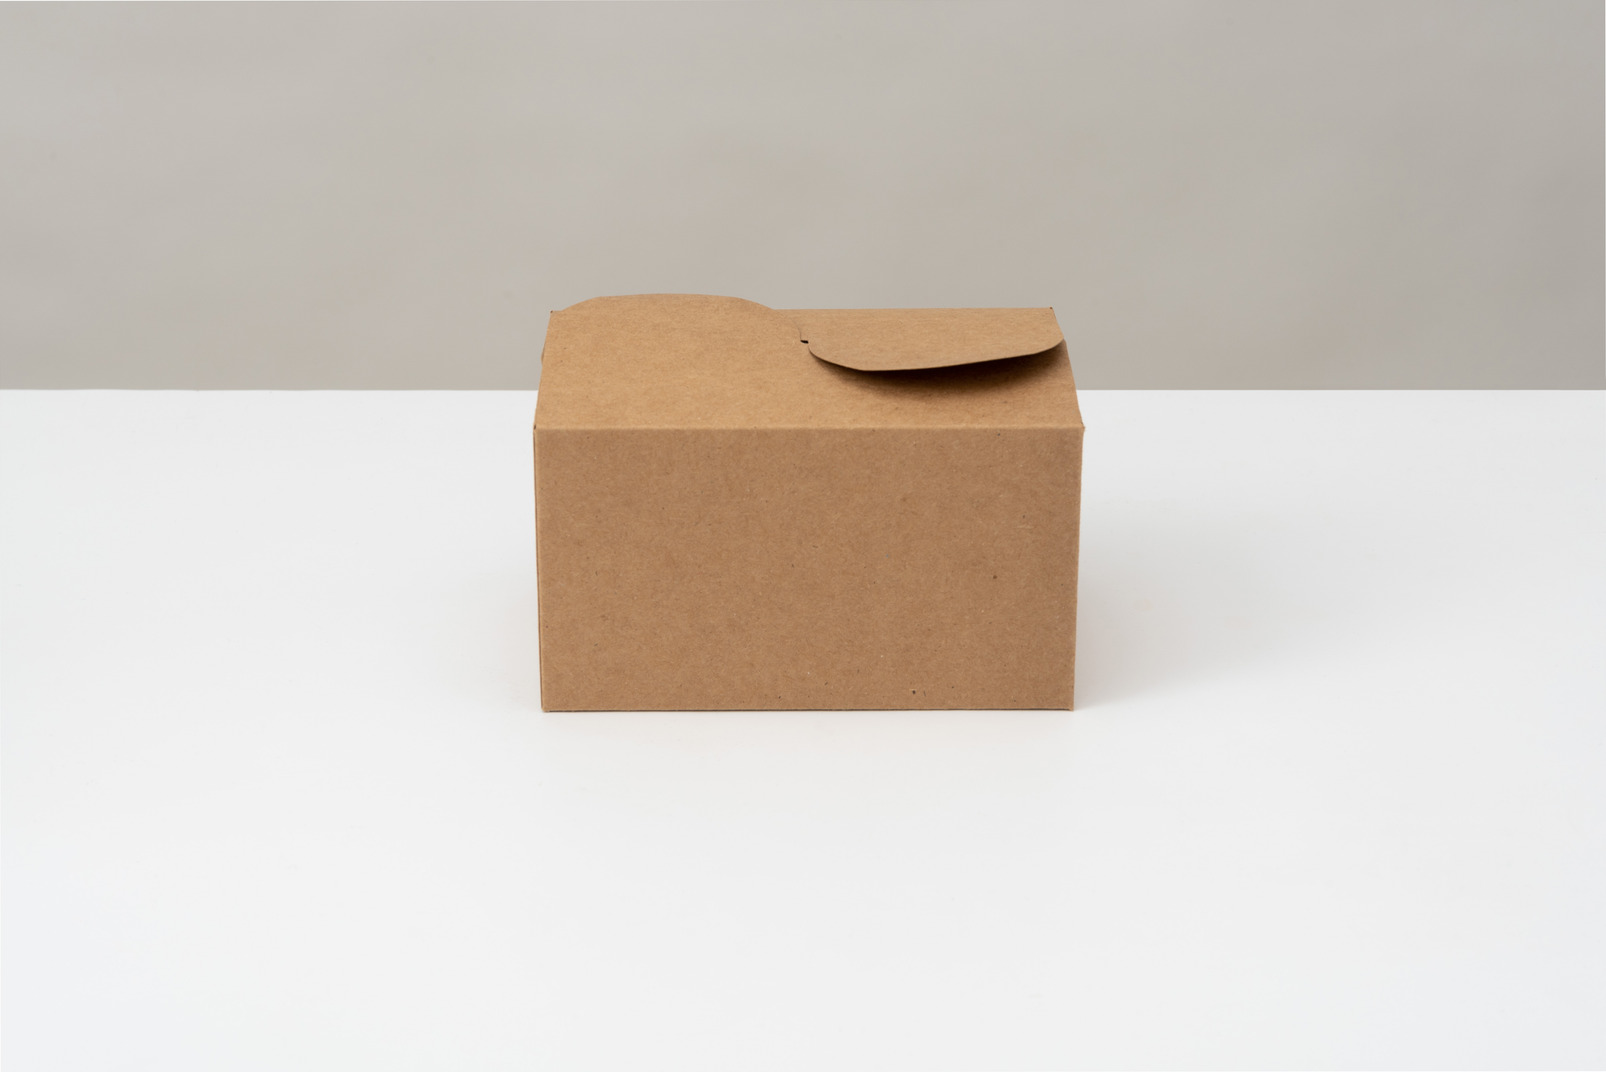 Promotional brown paper box